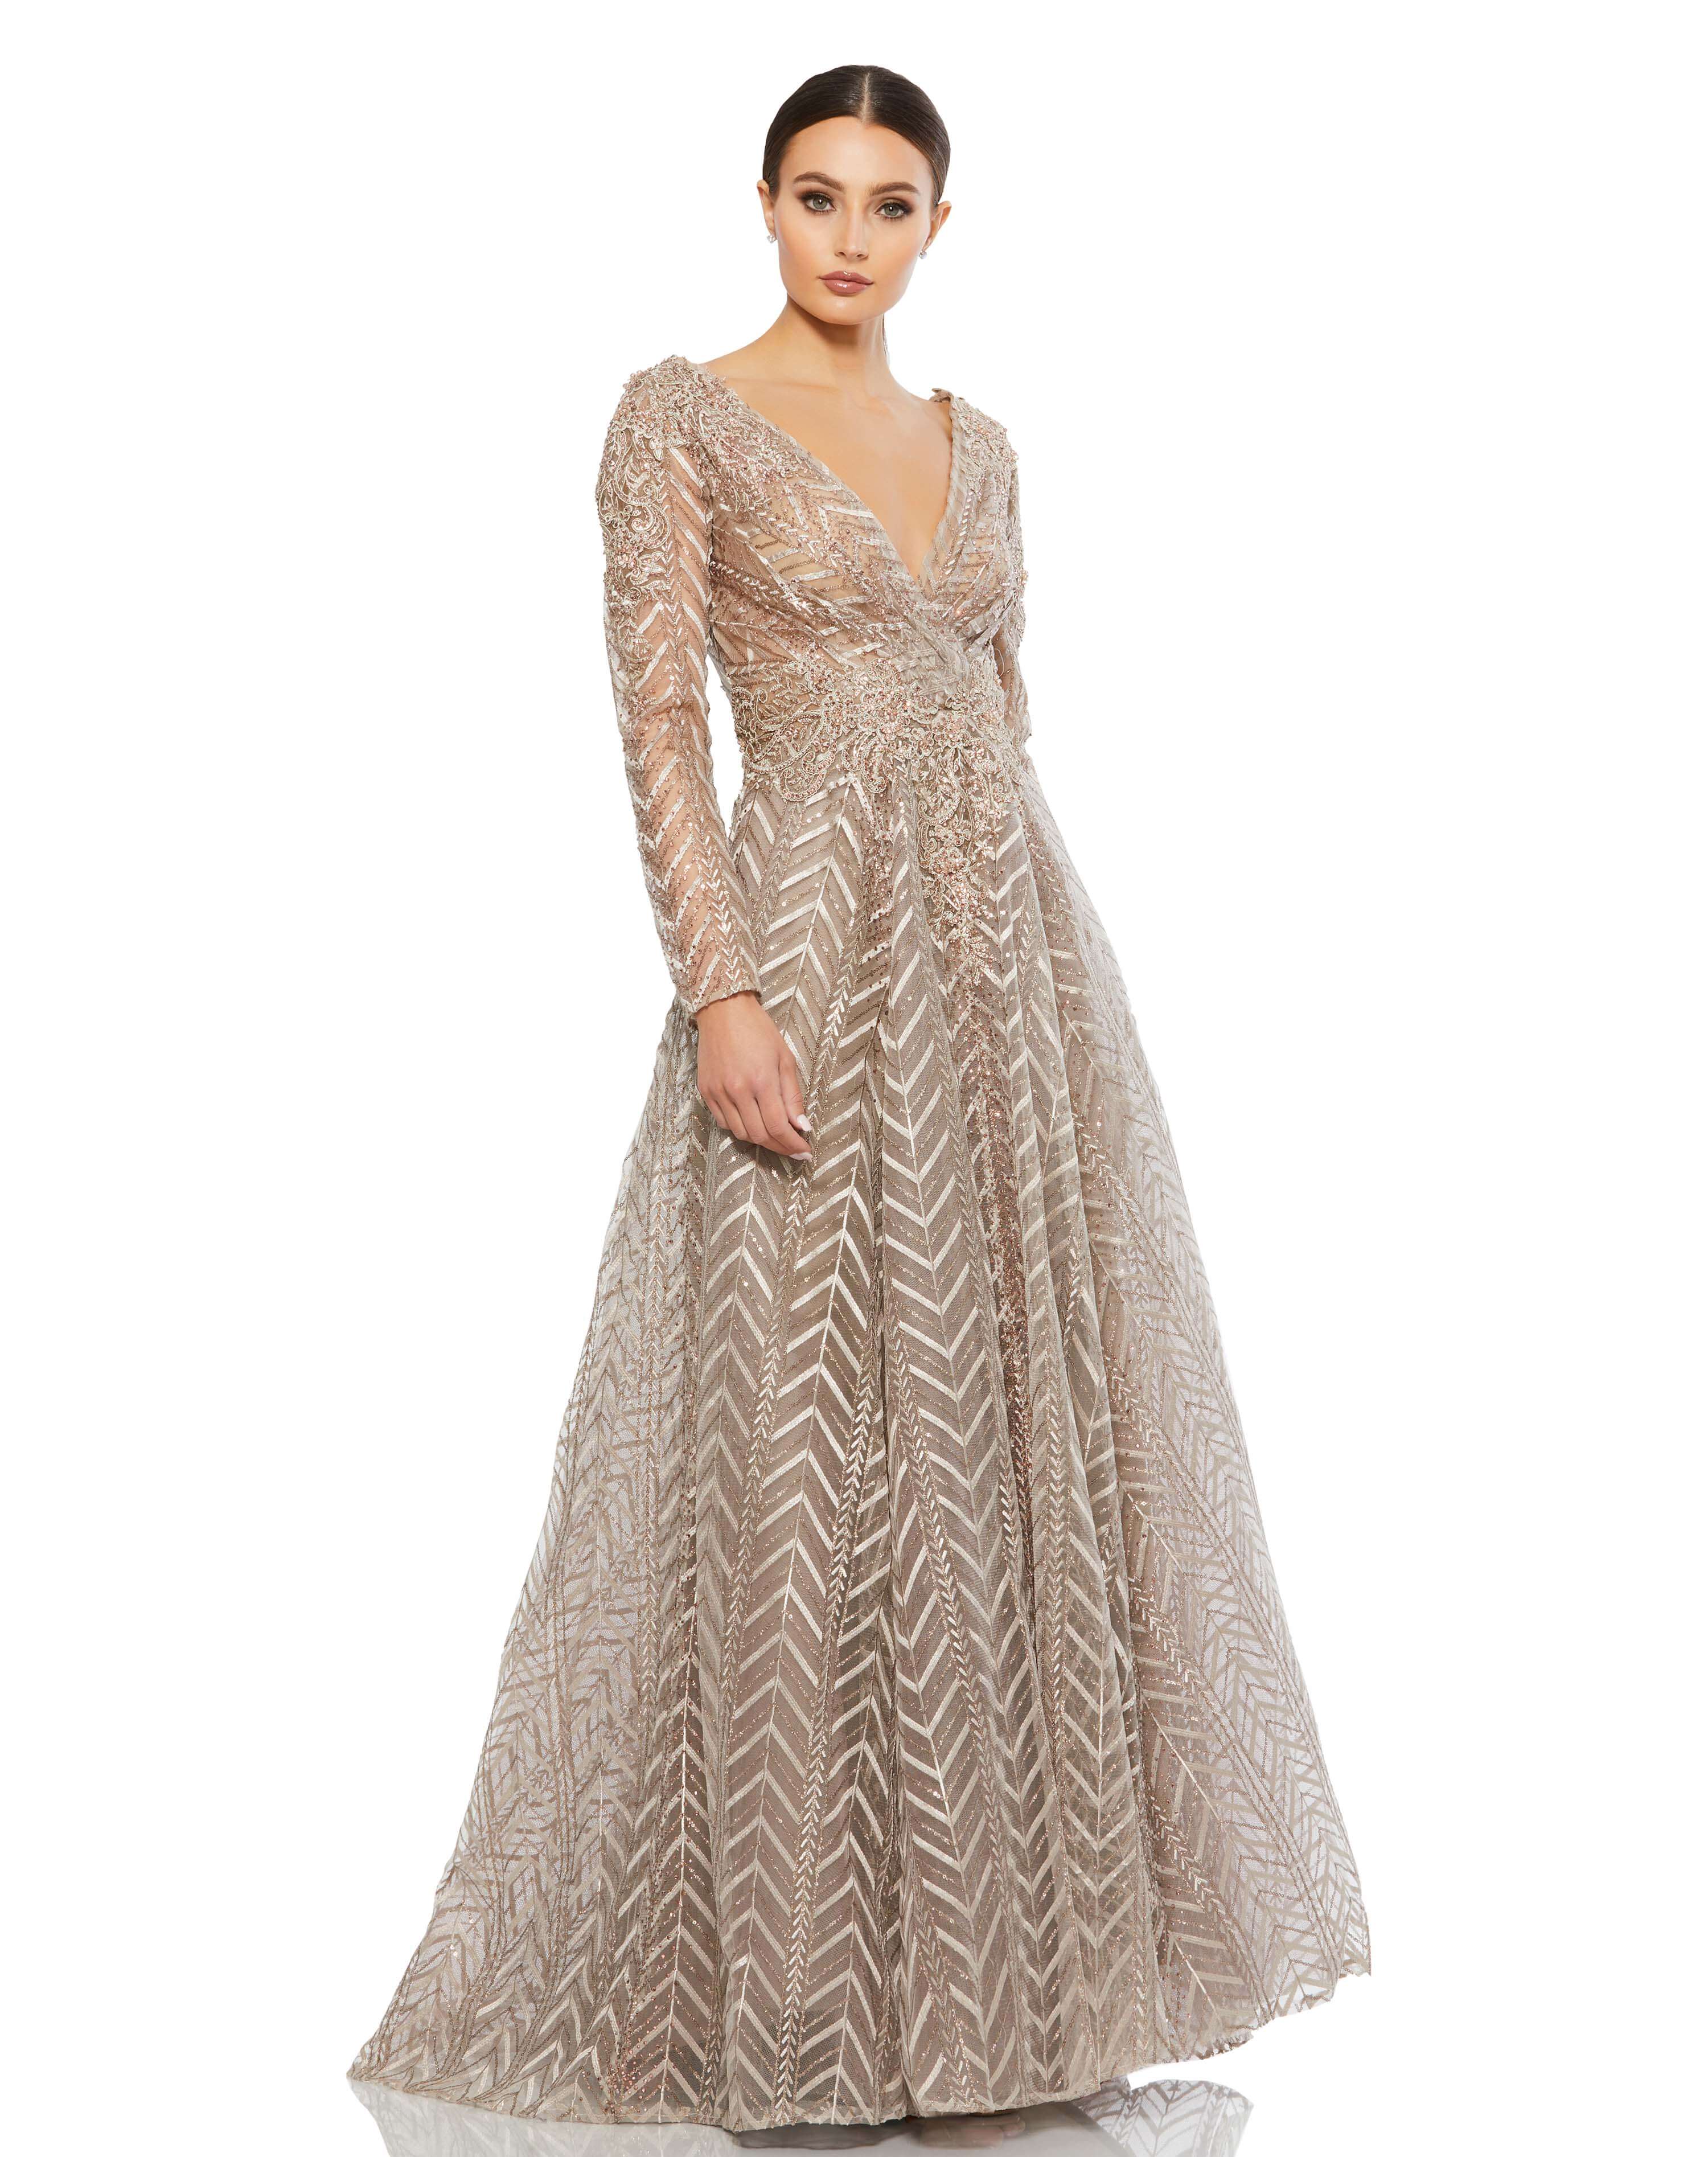 Embellished Illusion Long Sleeve Wrap Over A Line Gown